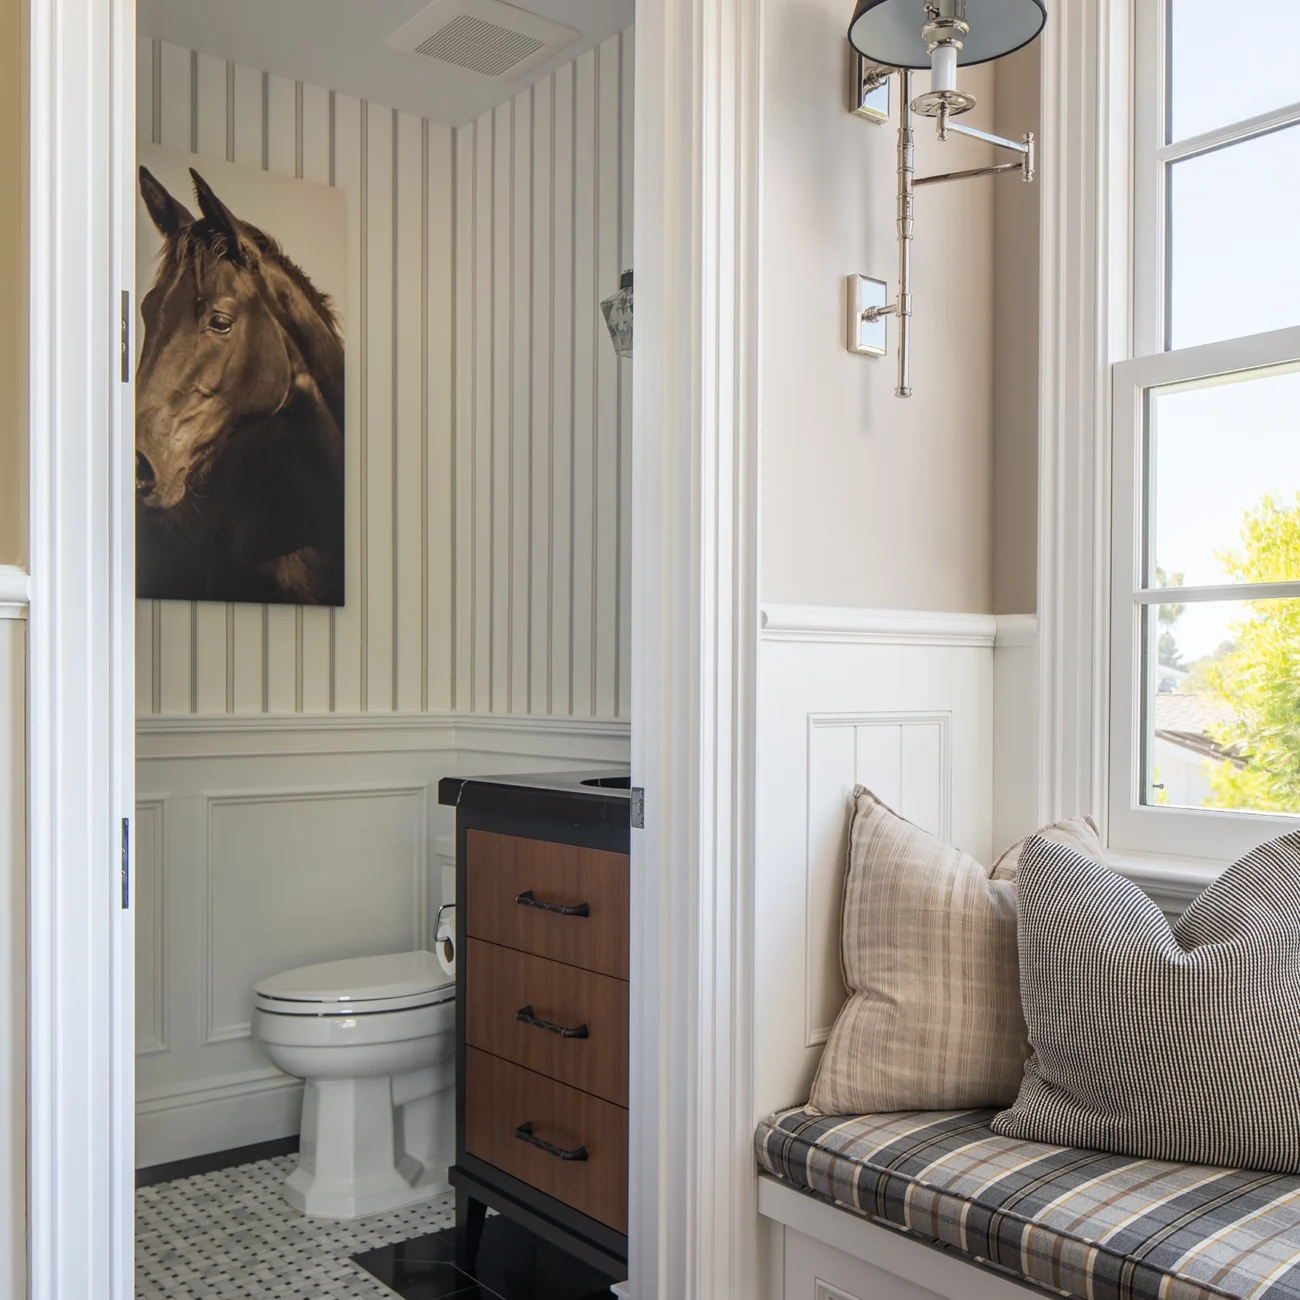 Christine Vroom Interiors Strawberry Lane | Traditional equestrian themed bathroom with black sink and wainscoting and view of seating nook